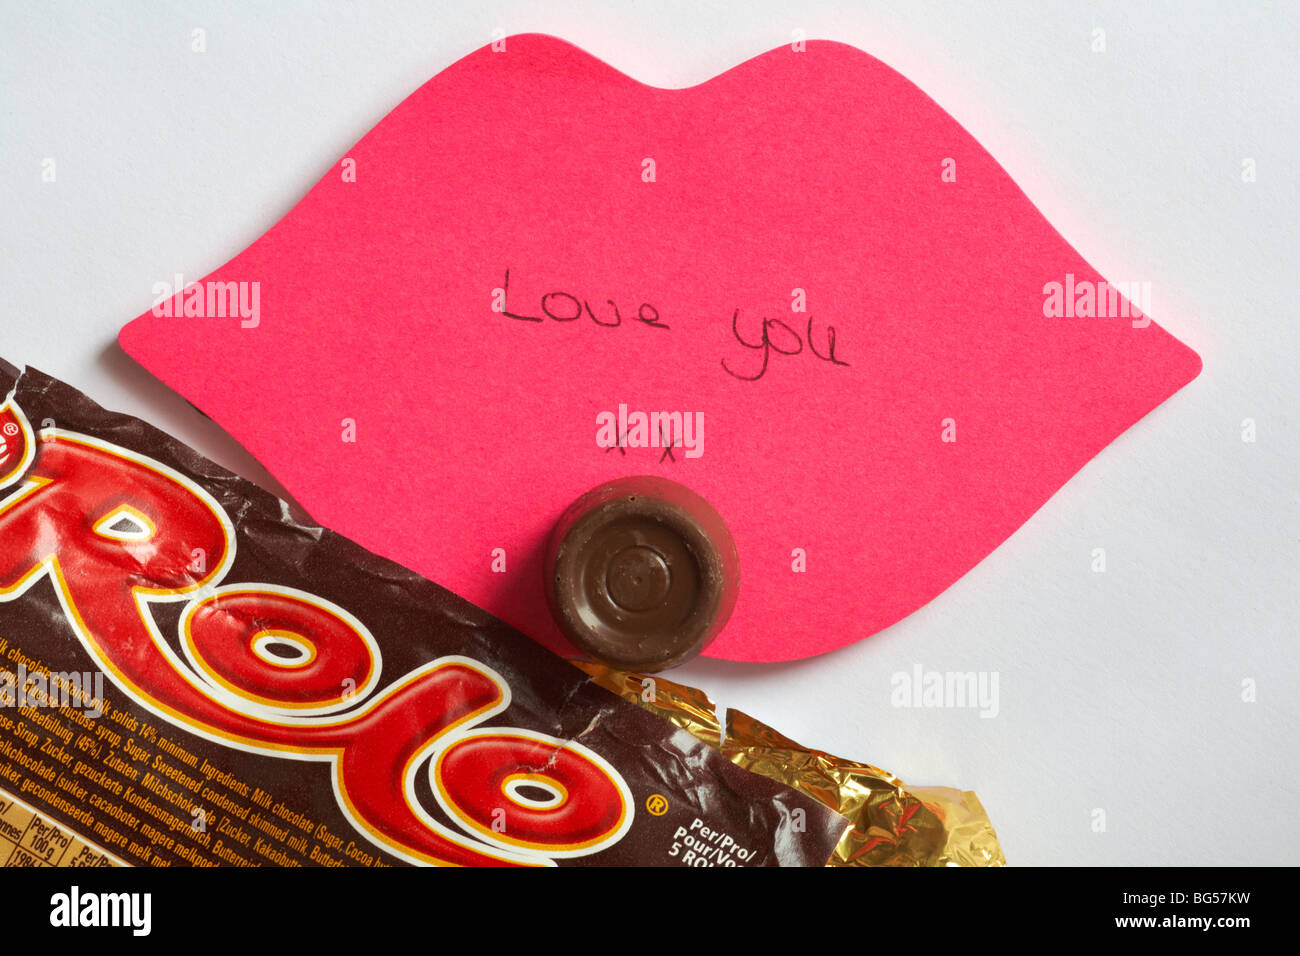 love you - the last rolo - Love you xx written on pink lips post it note with the last rolo of the packet set on white background Stock Photo